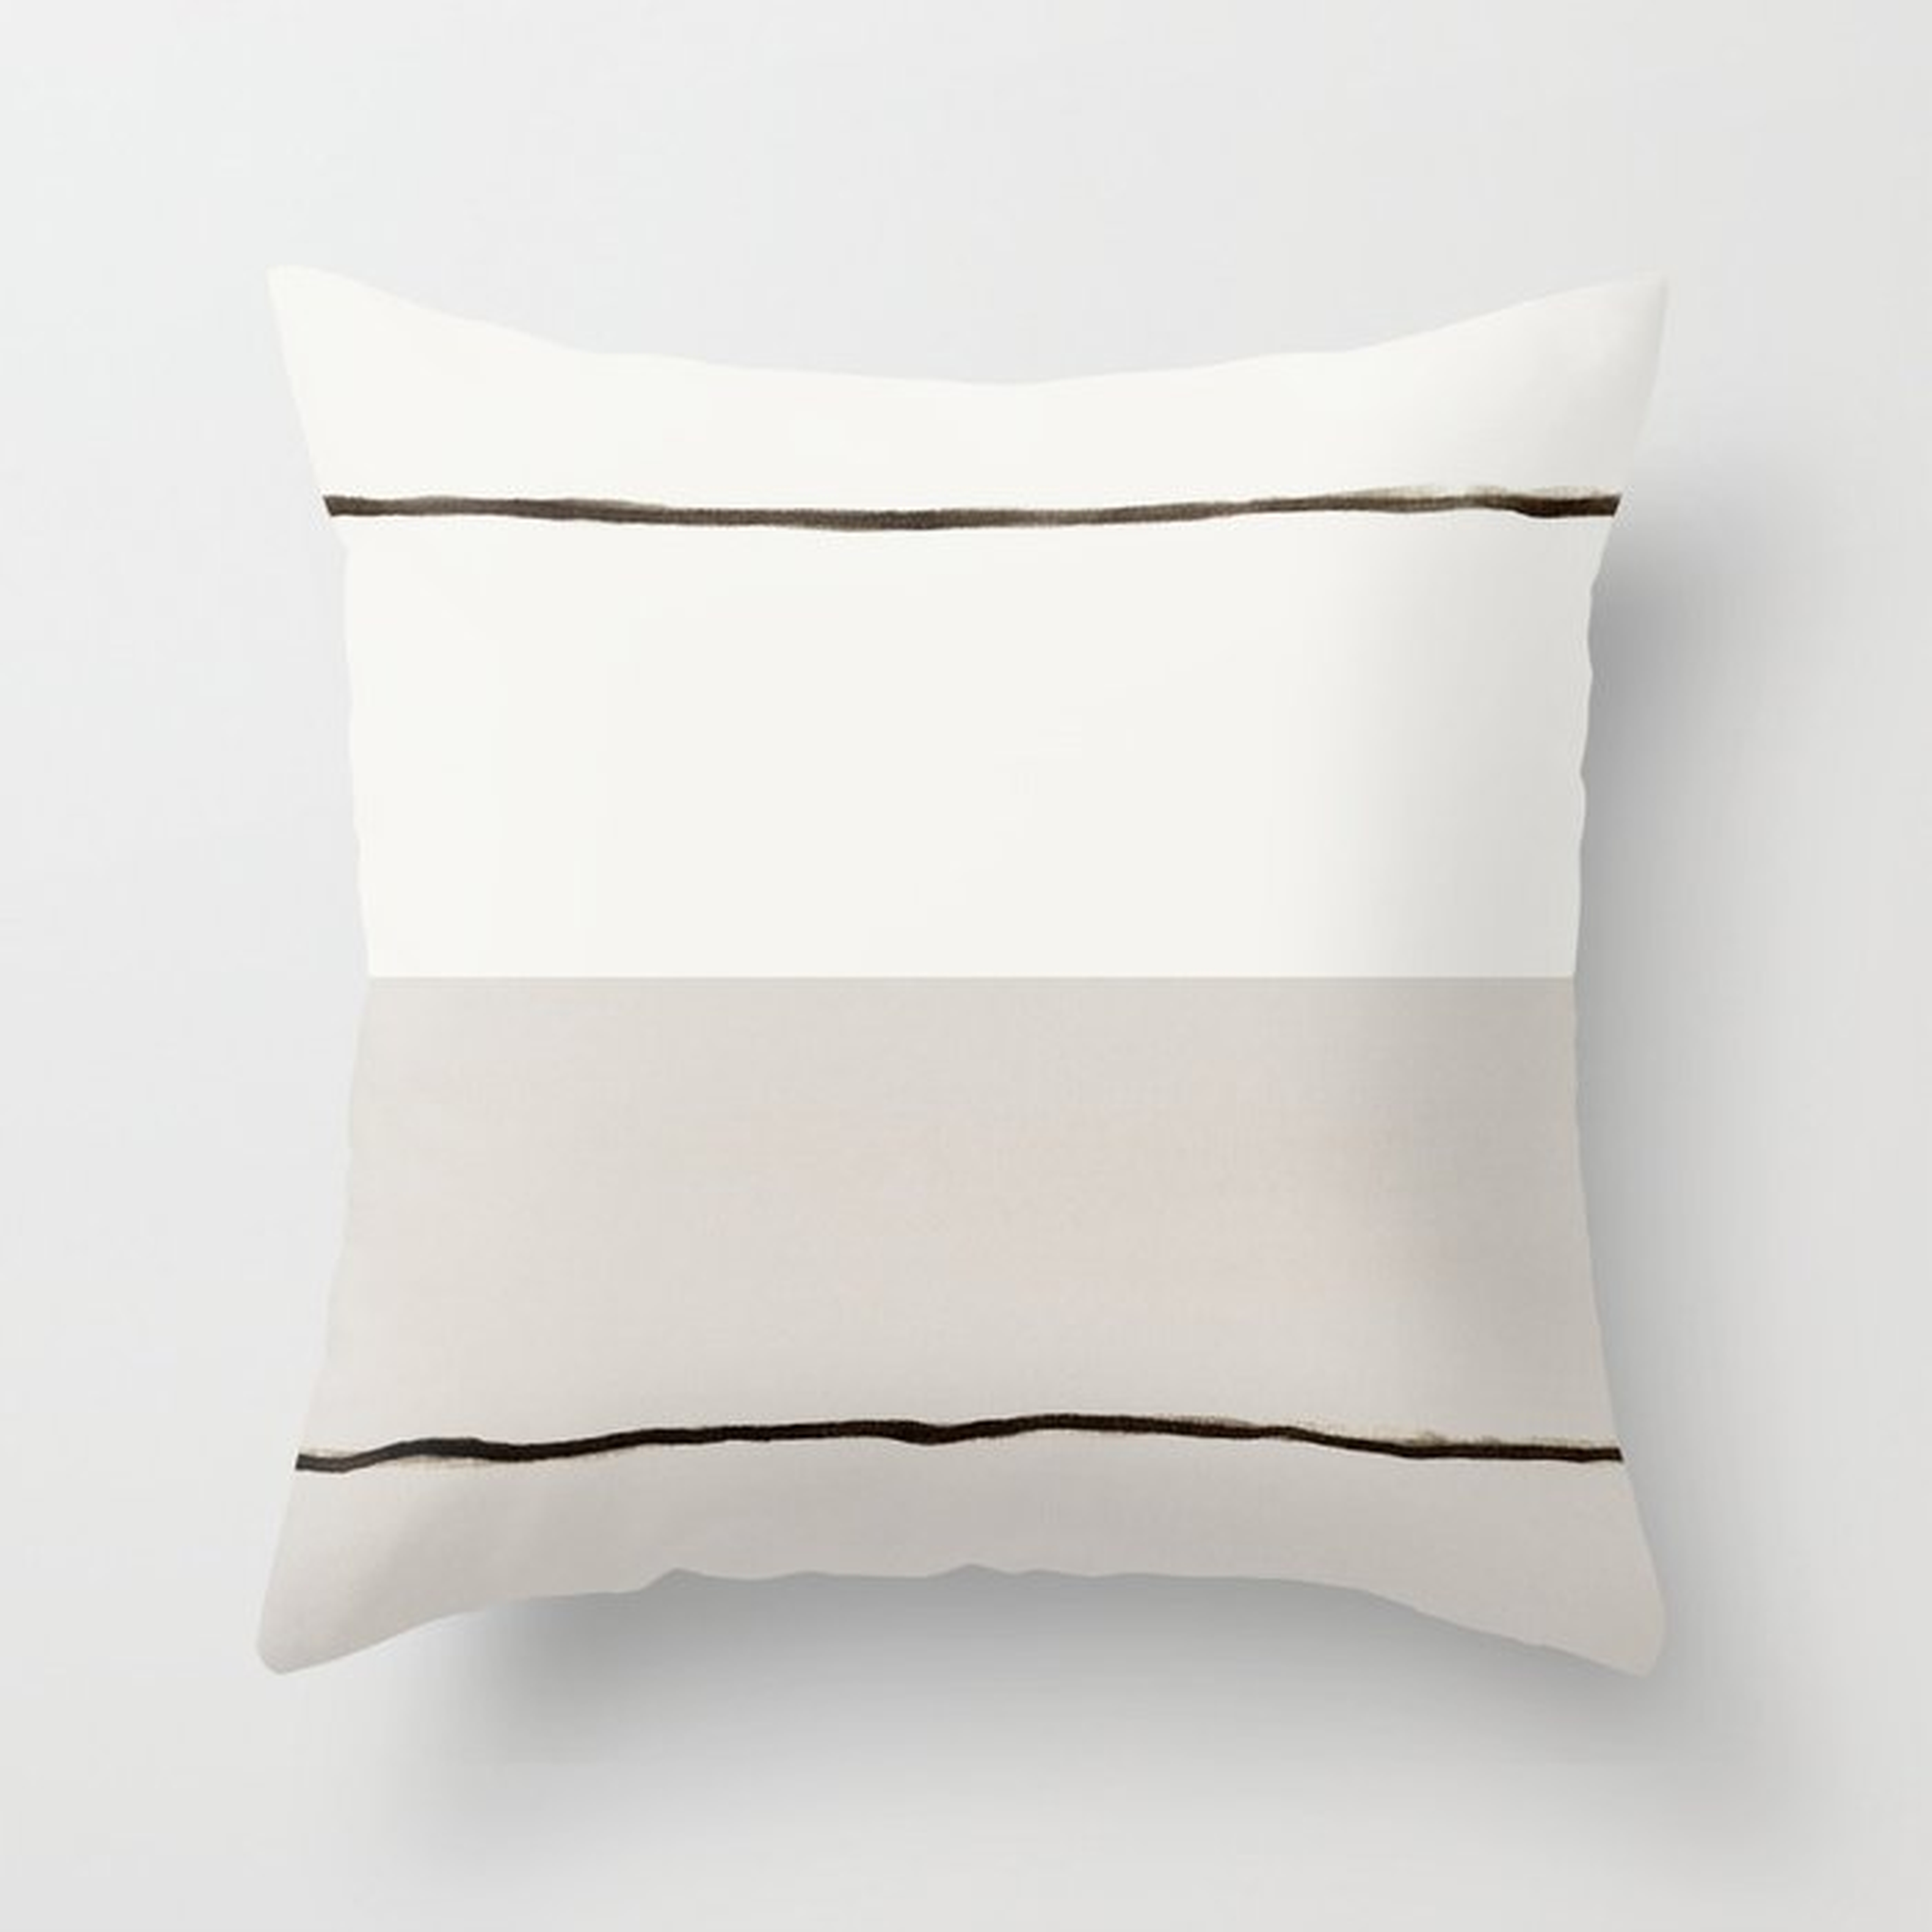 Minimal Space 03 Throw Pillow by Georgiana Paraschiv - Cover (20" x 20") With Pillow Insert - Outdoor Pillow - Society6